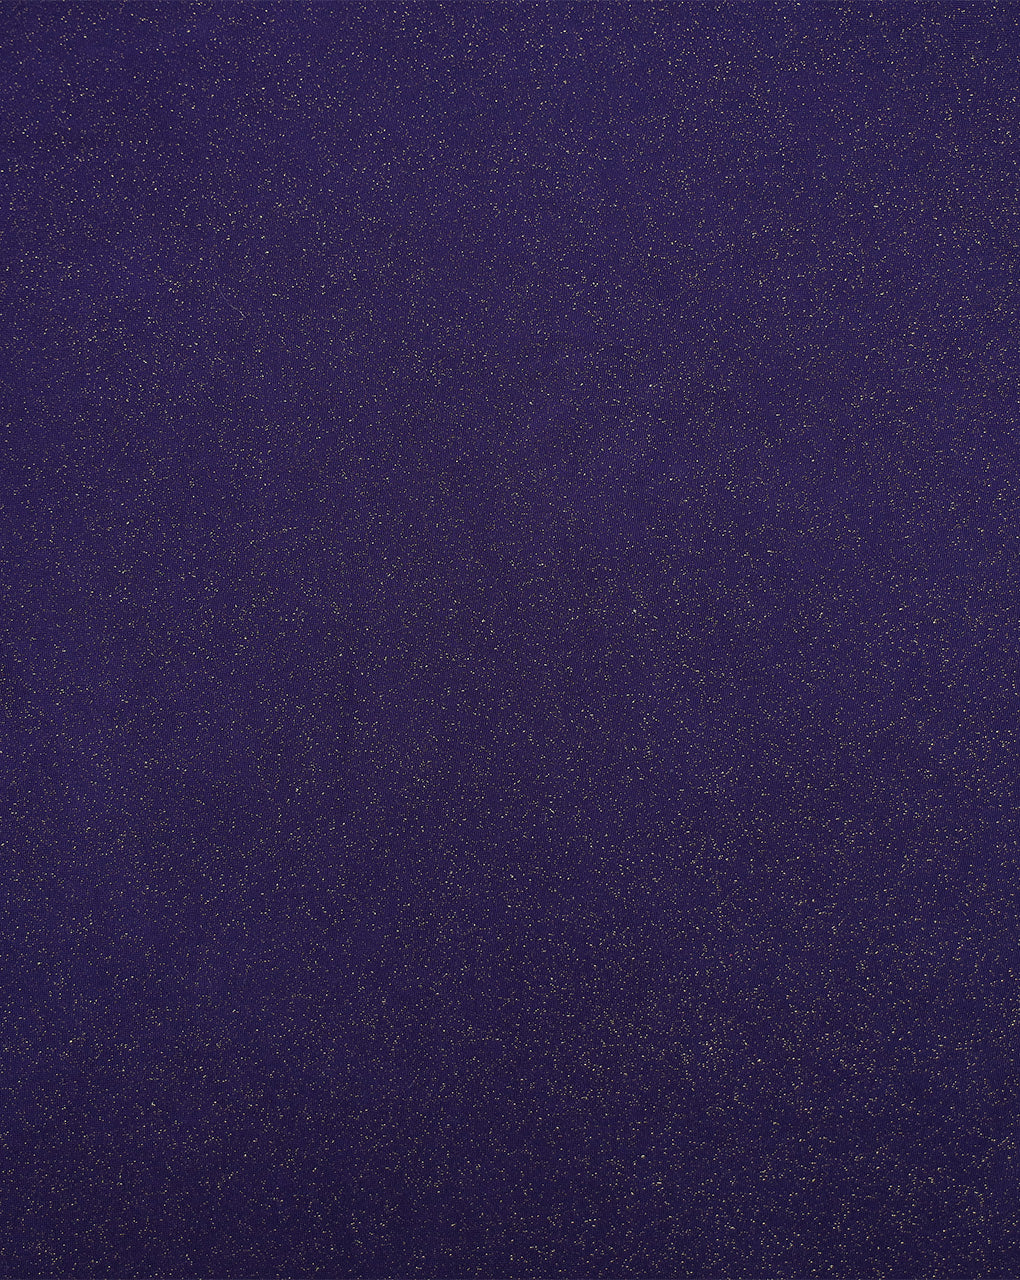 DARK PURPLE POLYESTER KNITTED FOIL FABRIC